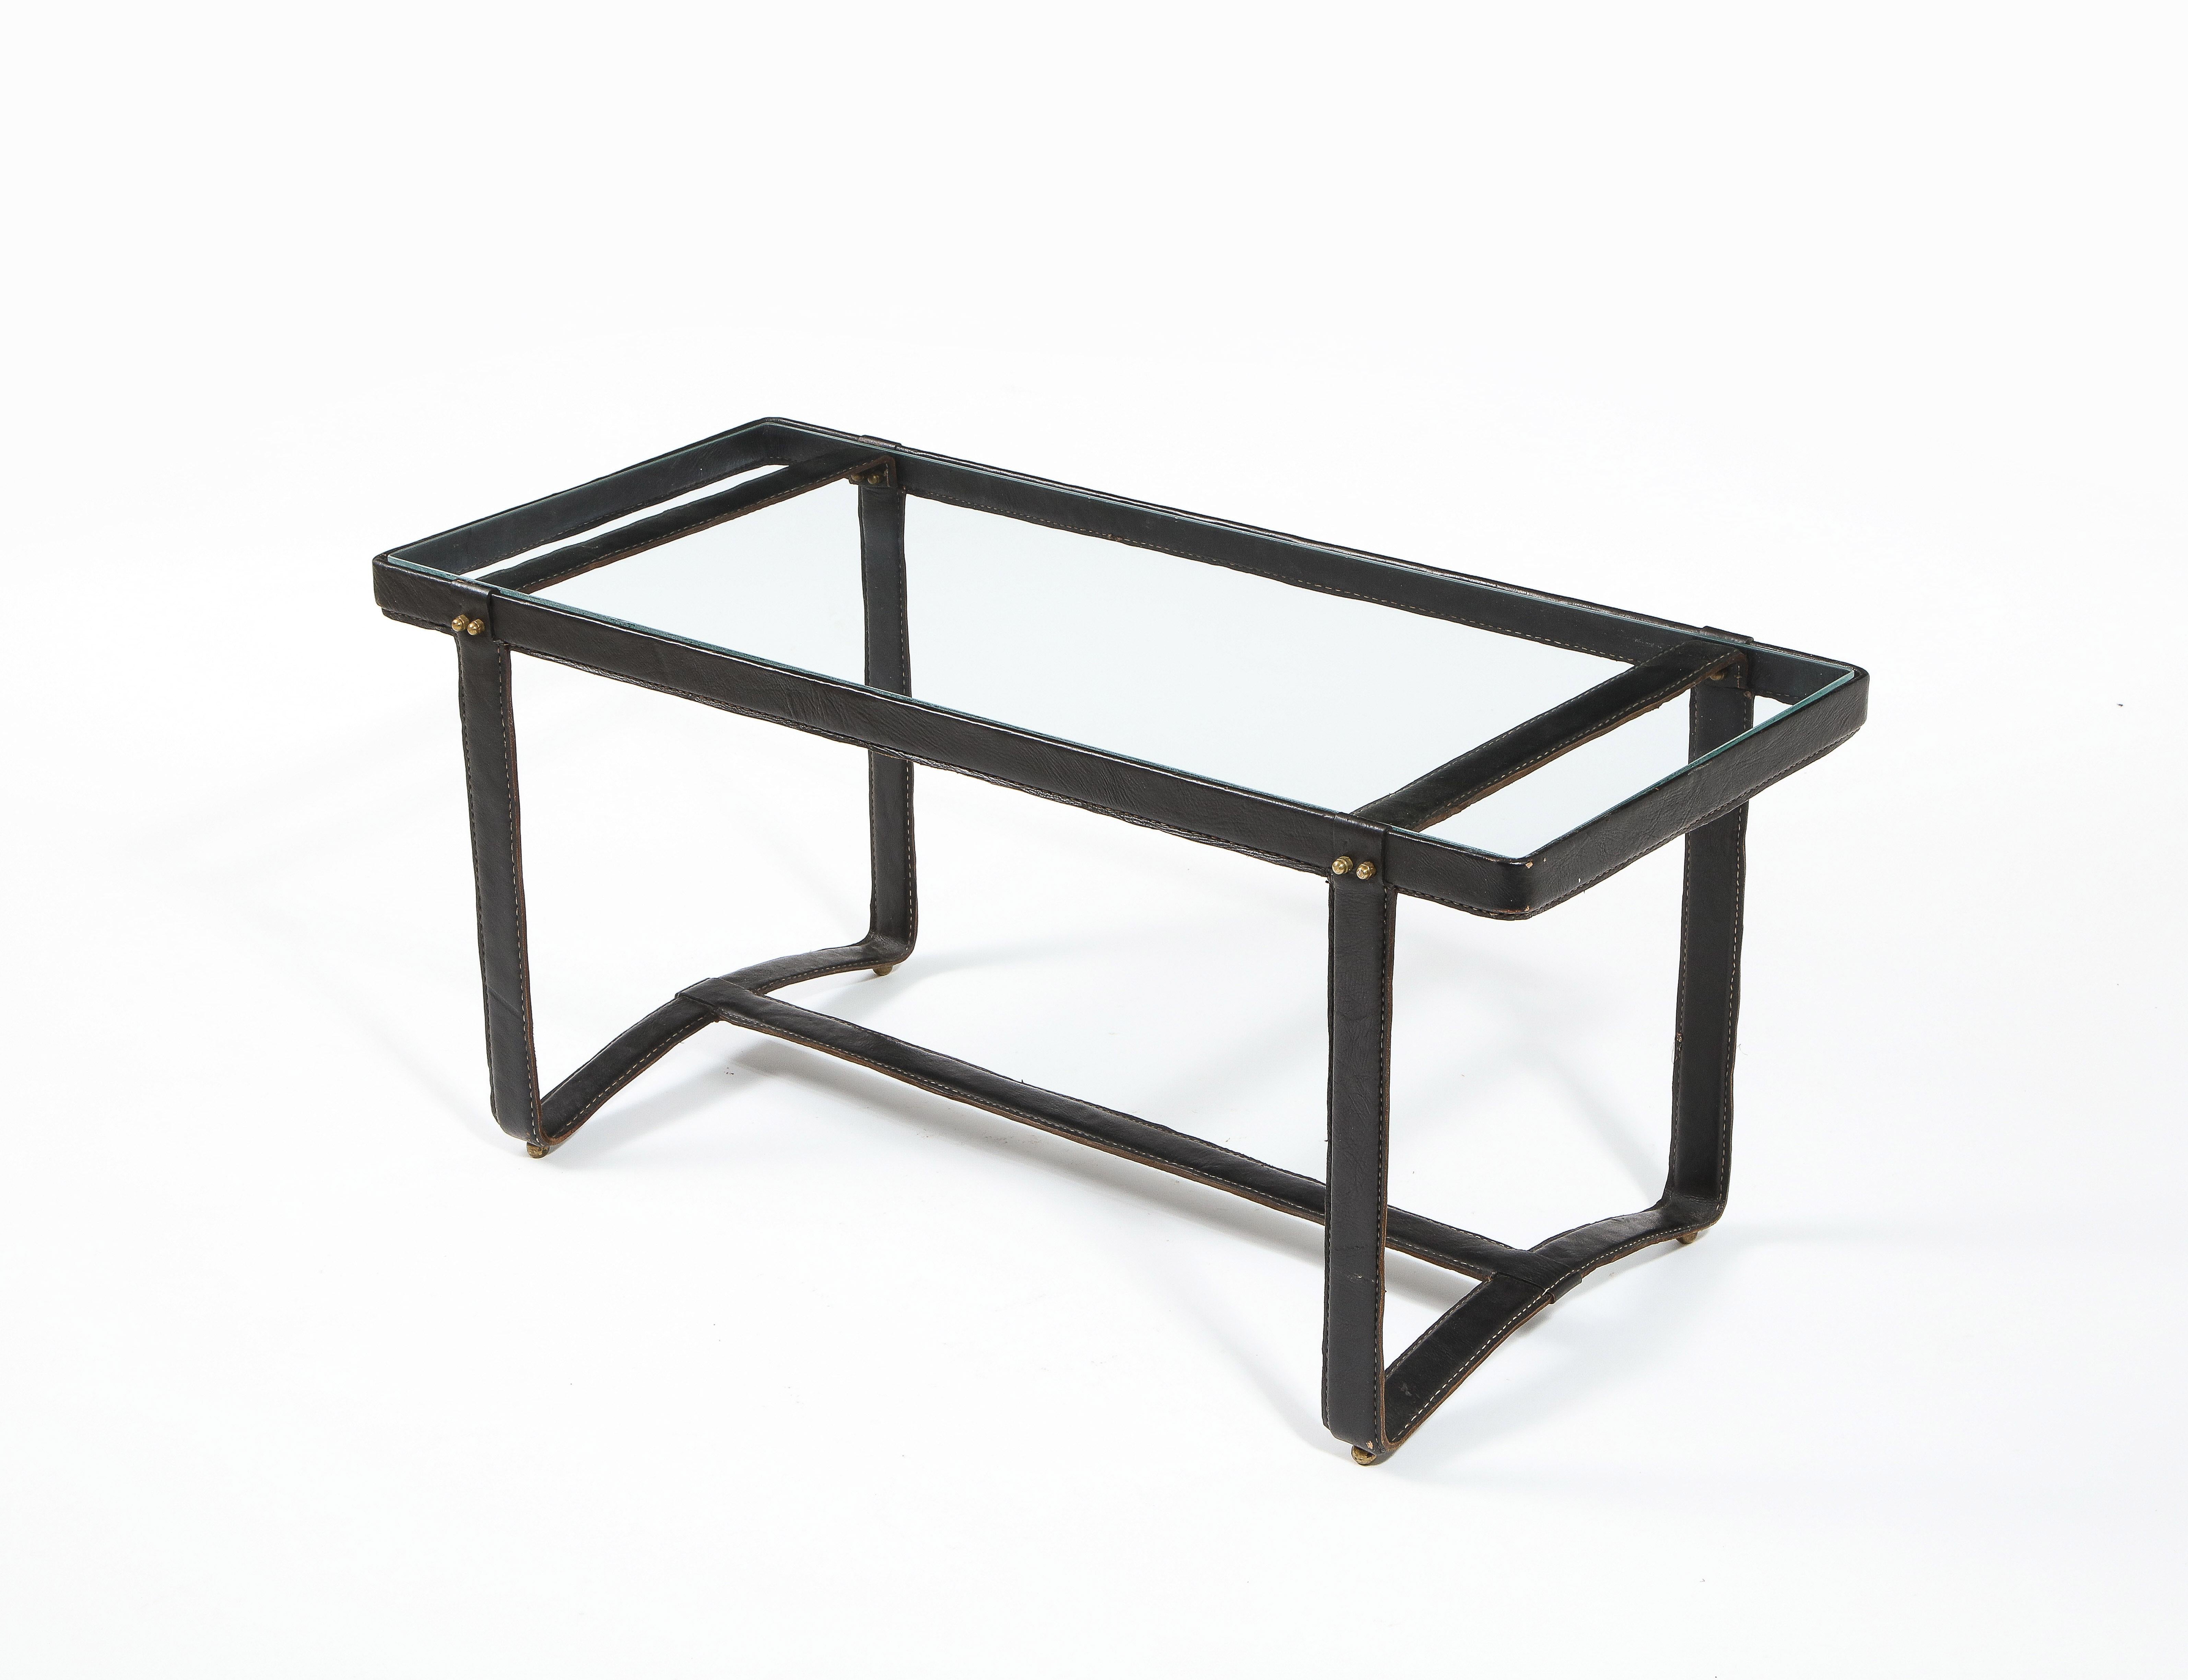 20th Century Jacques Adnet Black Leather Coffee Table, France 1950's For Sale